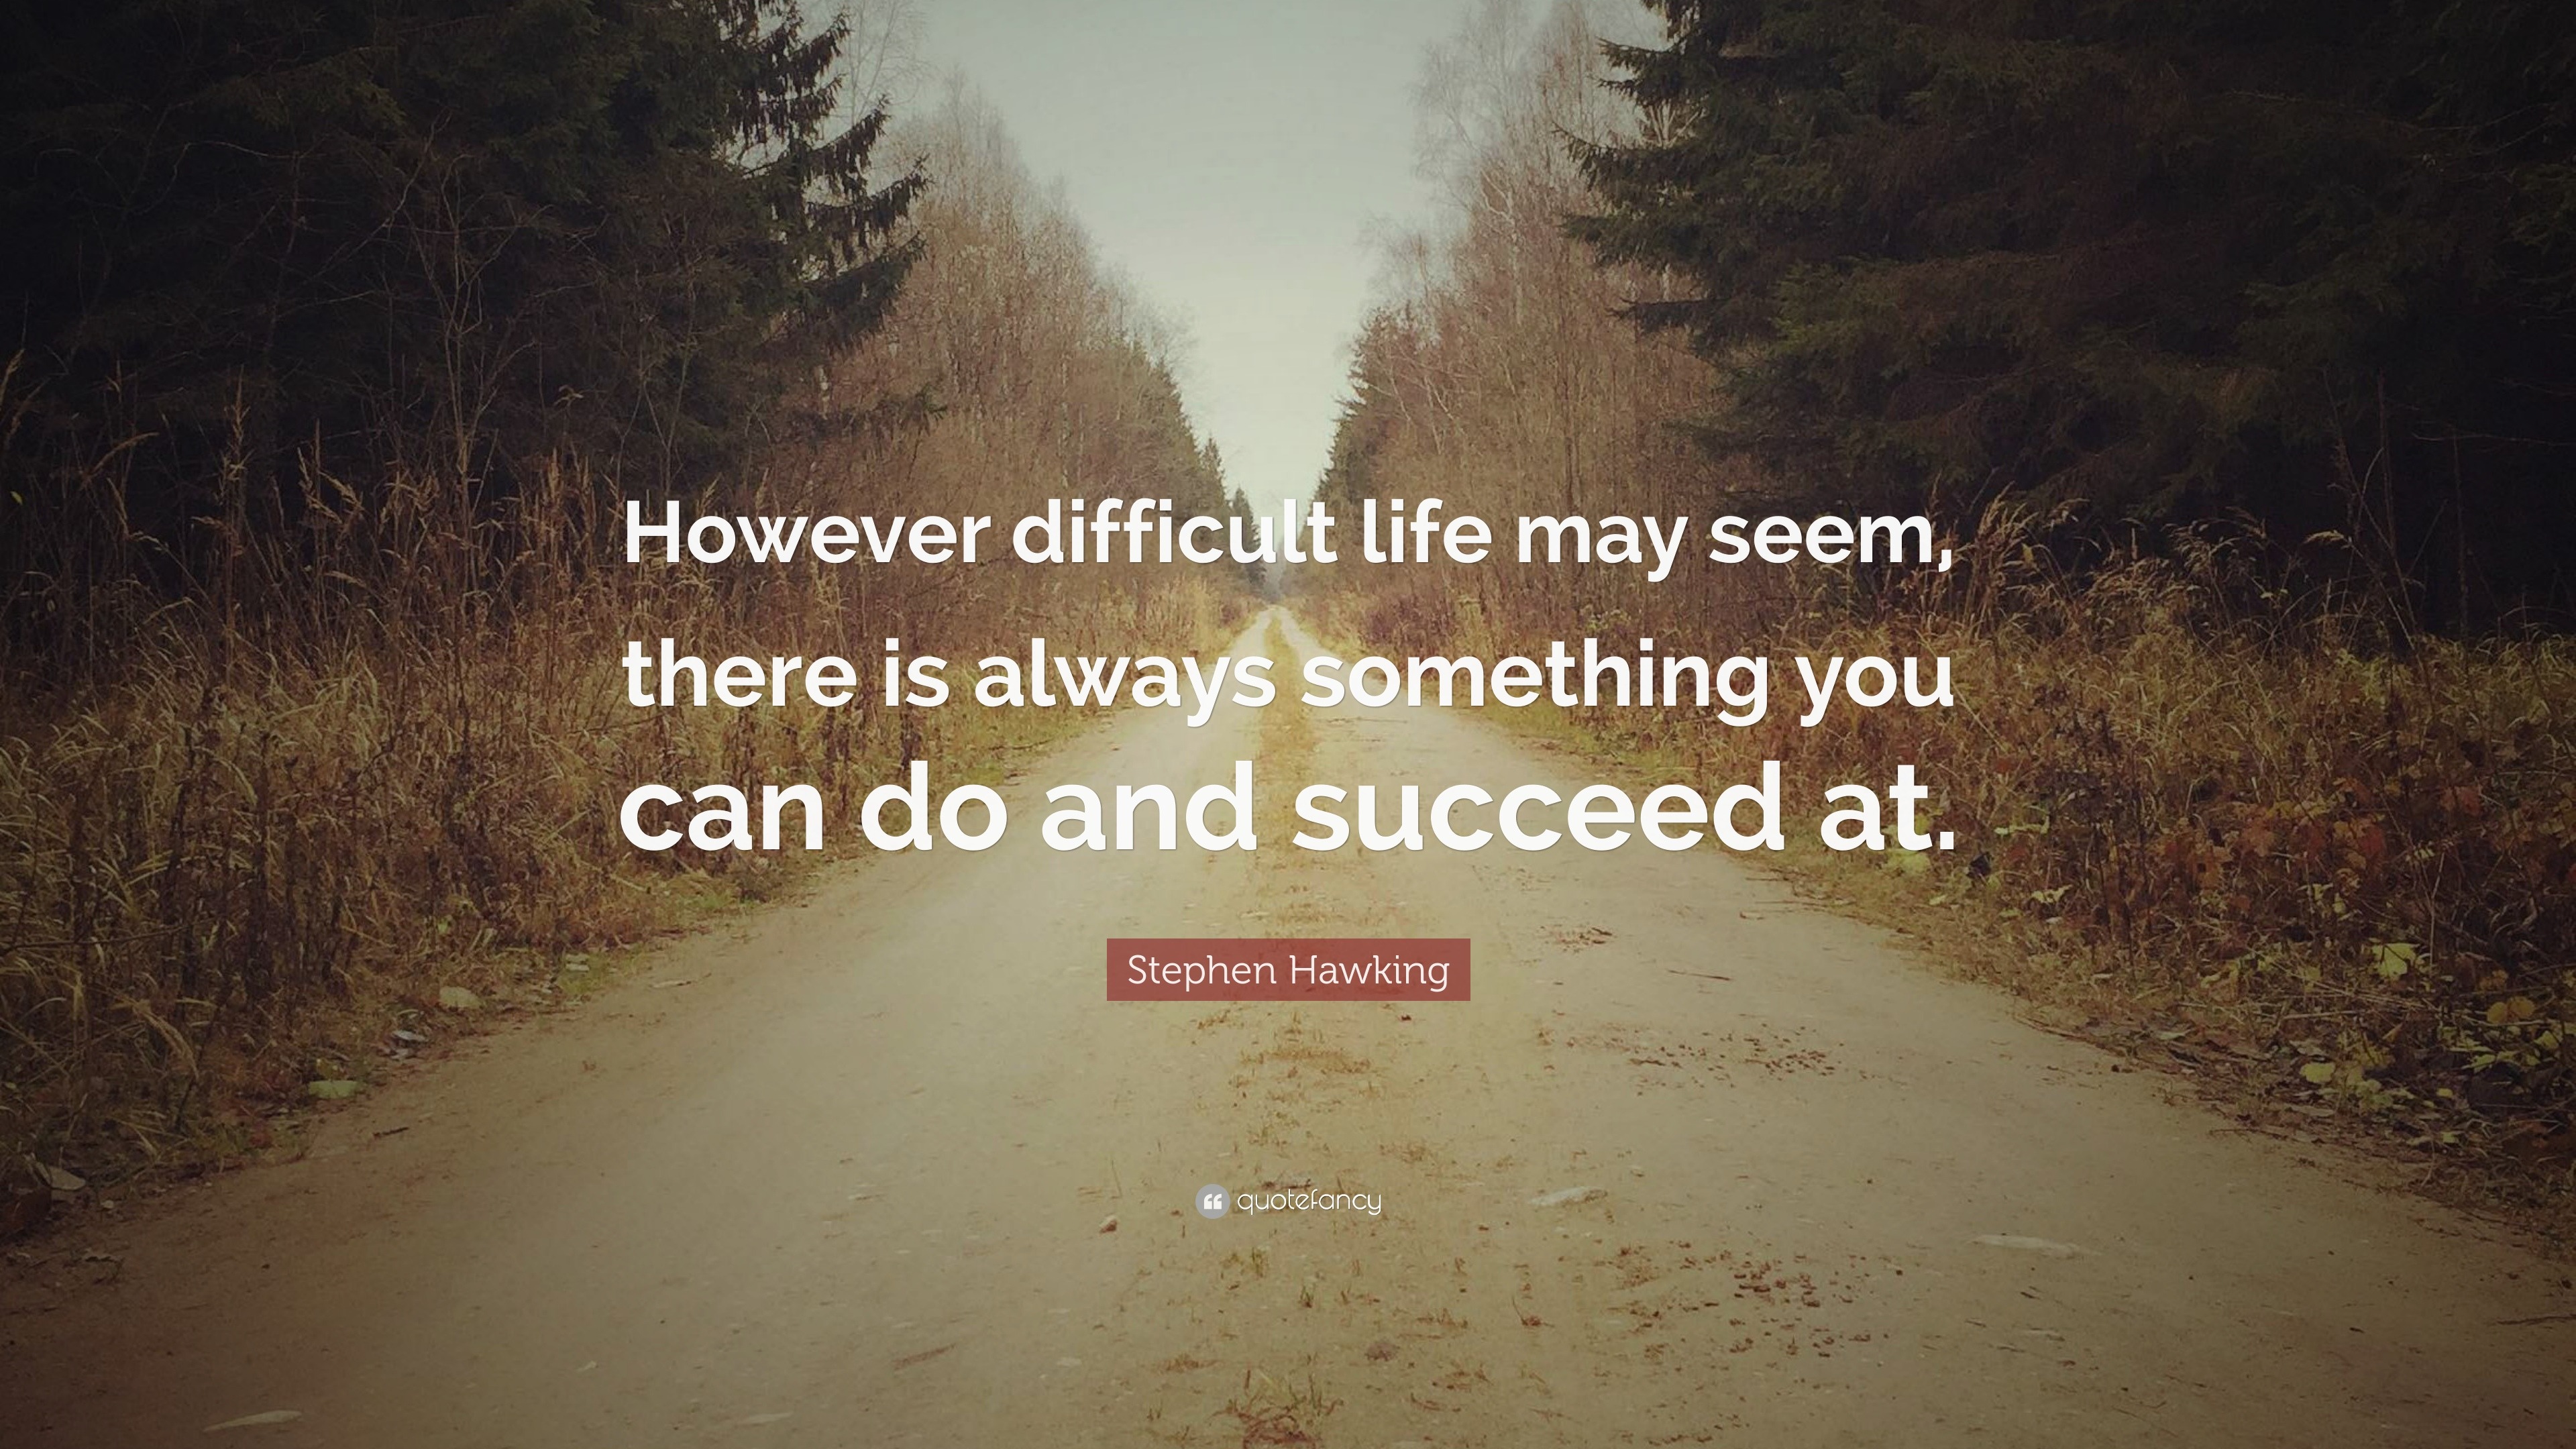 Stephen Hawking Quote: “However difficult life may seem, there is